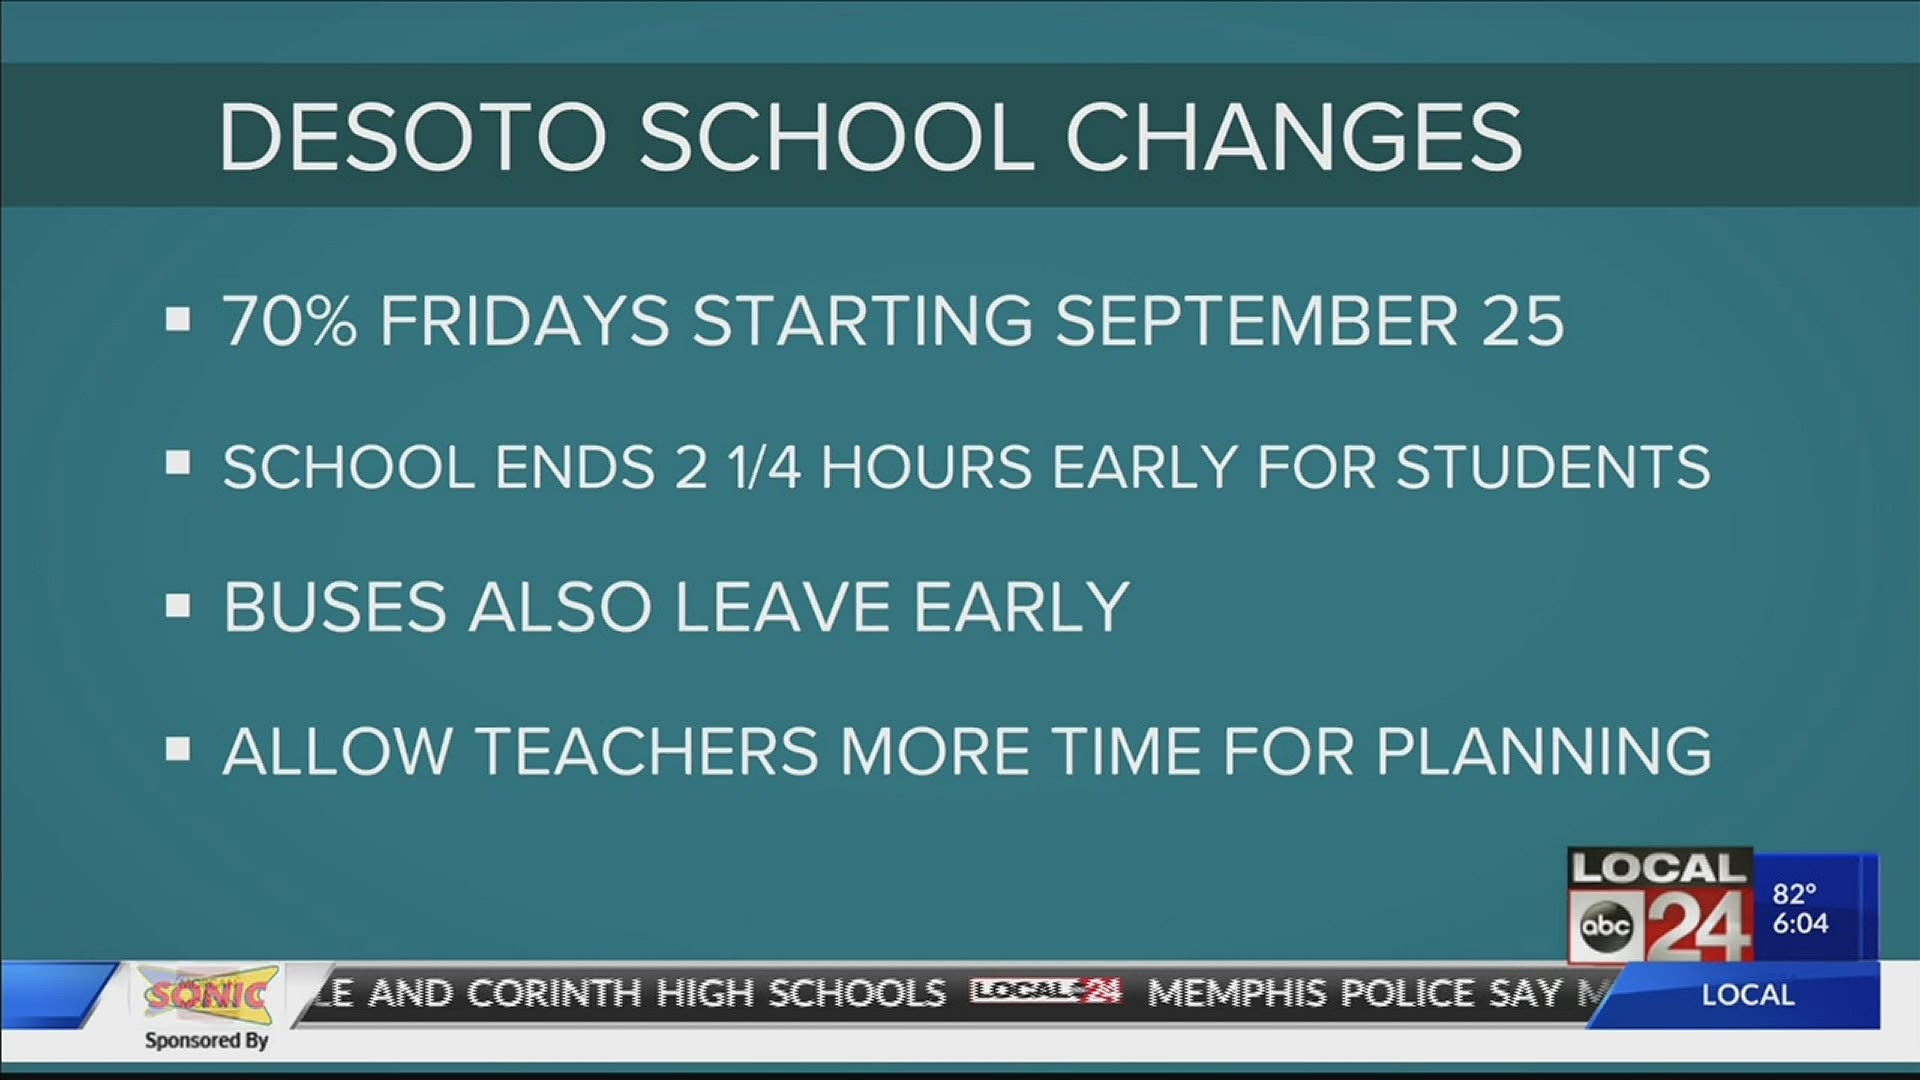 DCS says starting September 25th, each Friday will be a 70% school day to allow for teacher planning time.